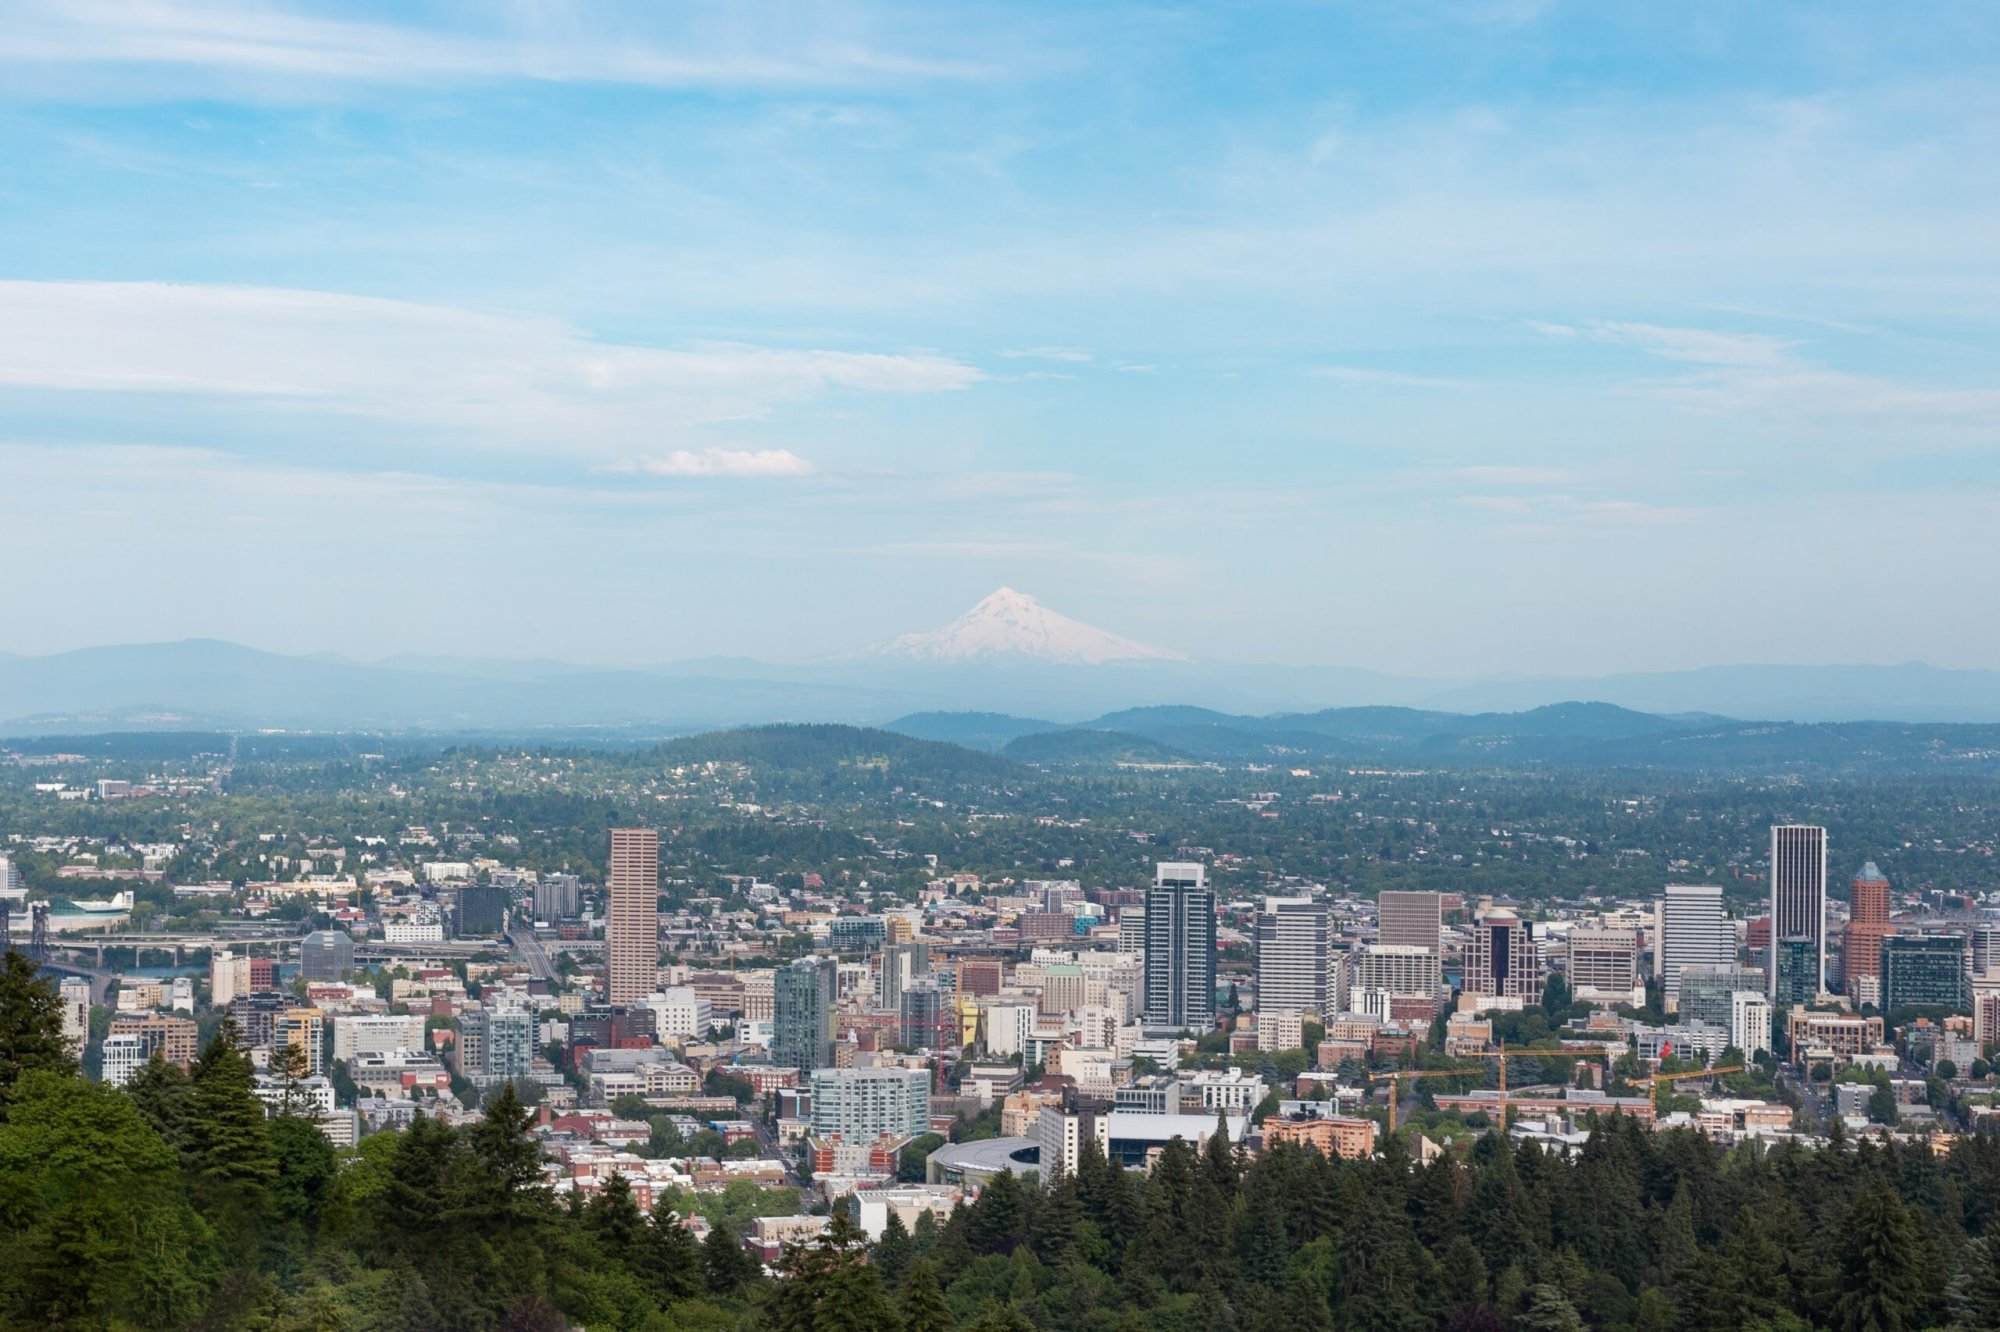 A view of the city of portland with mt hood in the background.